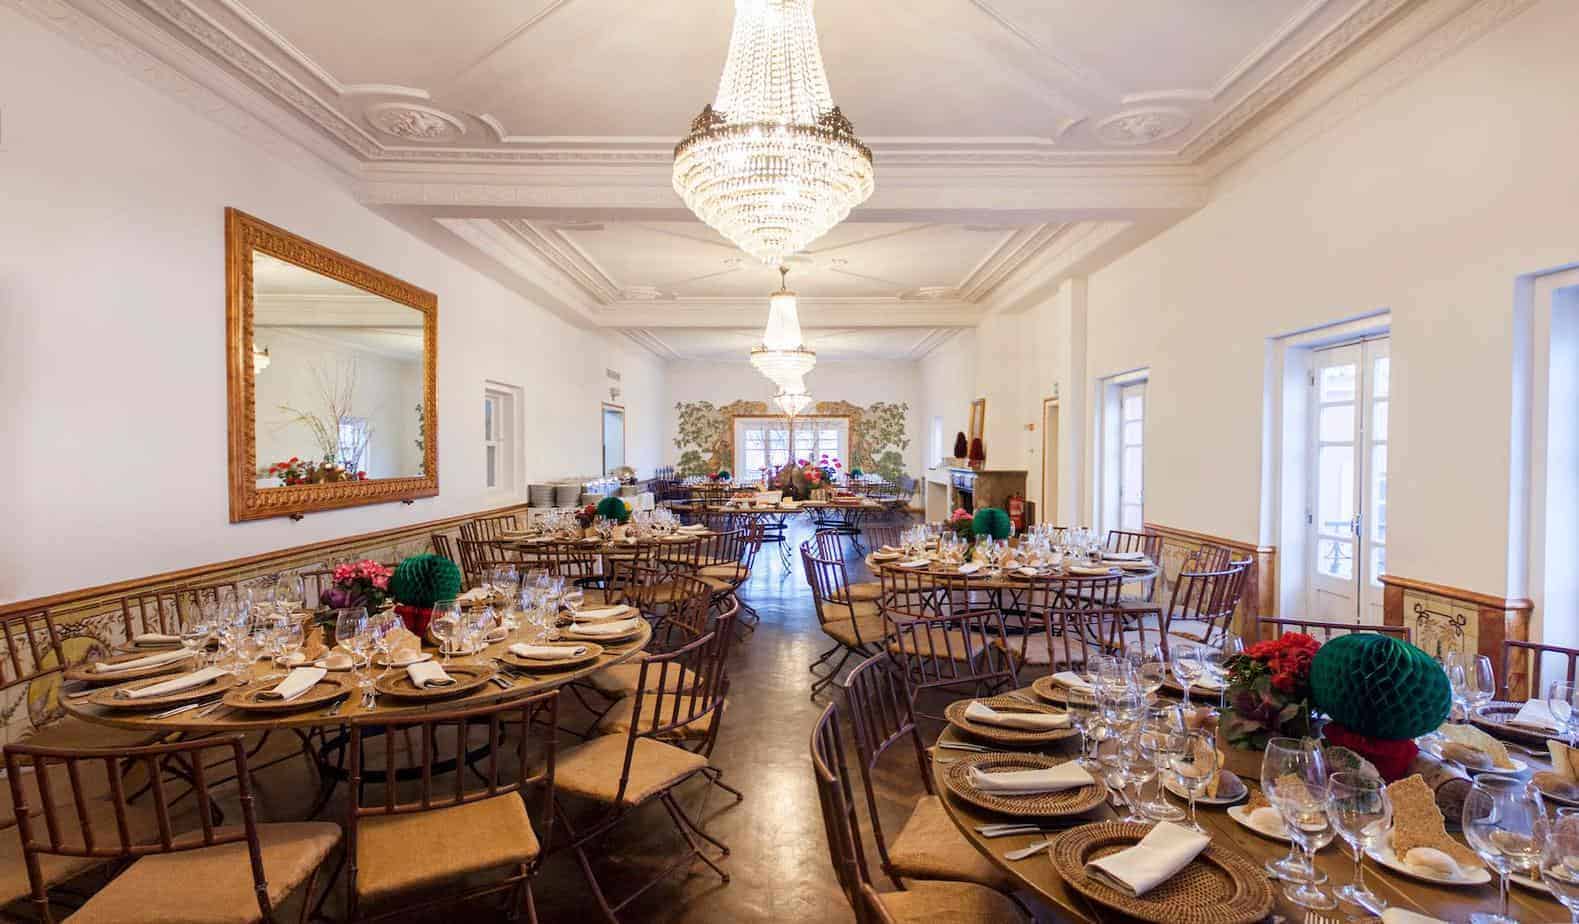 Elegant and luminous venue for private dining and receptions